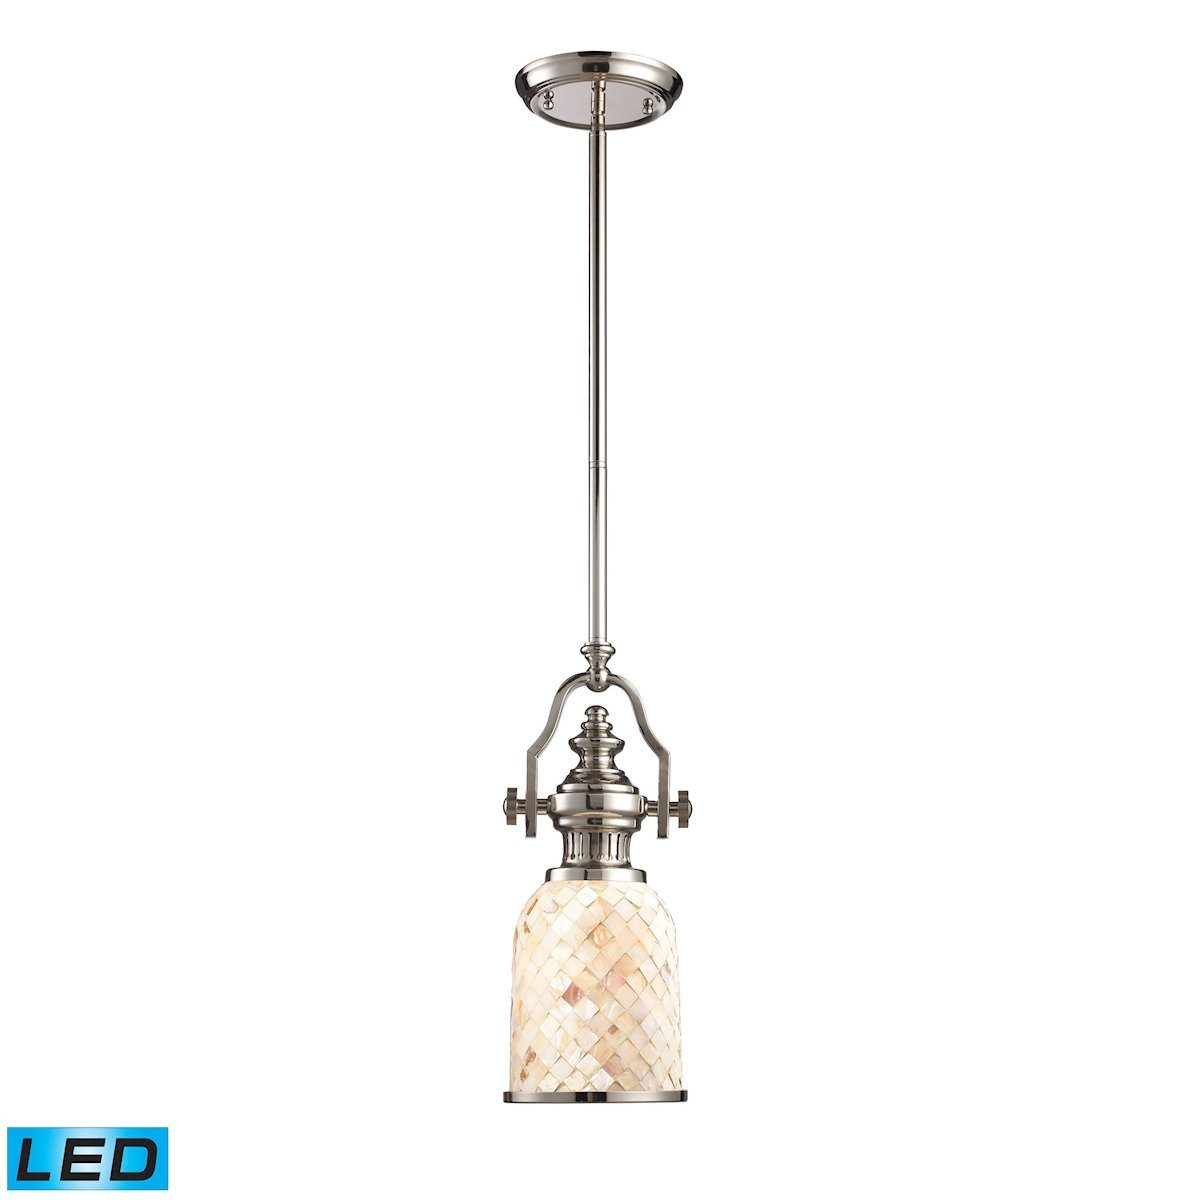 Chadwick LED Pendant In Polished Nickel And Cappa Shells Ceiling Elk Lighting 